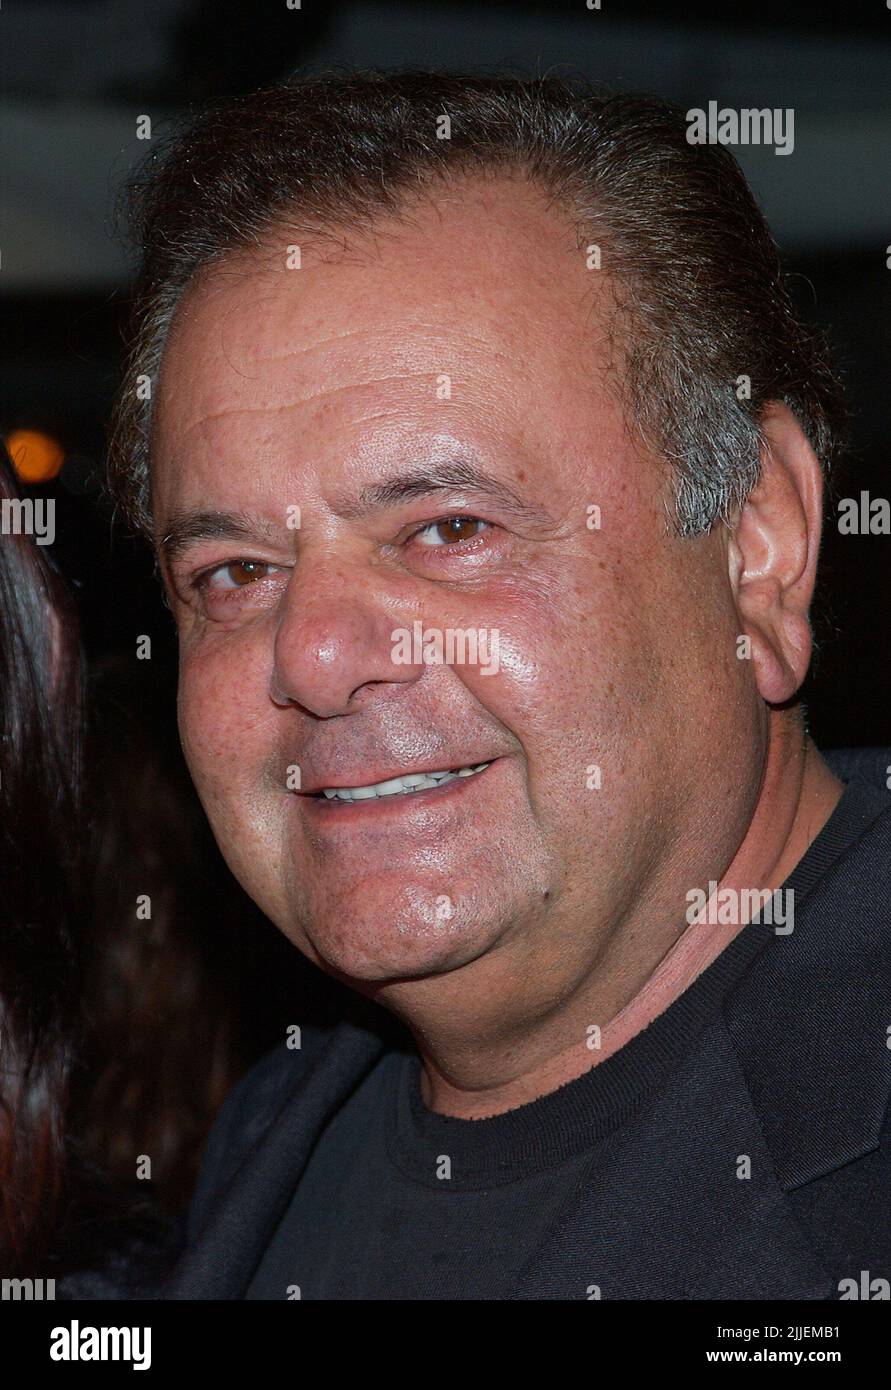 Los Angeles, United States. 21st Oct, 2010. Paul Sorvino arriving at the premiere of Domestic Disturbance on the Paramount lot in Los Angeles. October 30, 2001. SorvinoPaul03.jpg Credit: Tsuni/USA/Alamy Live News Stock Photo